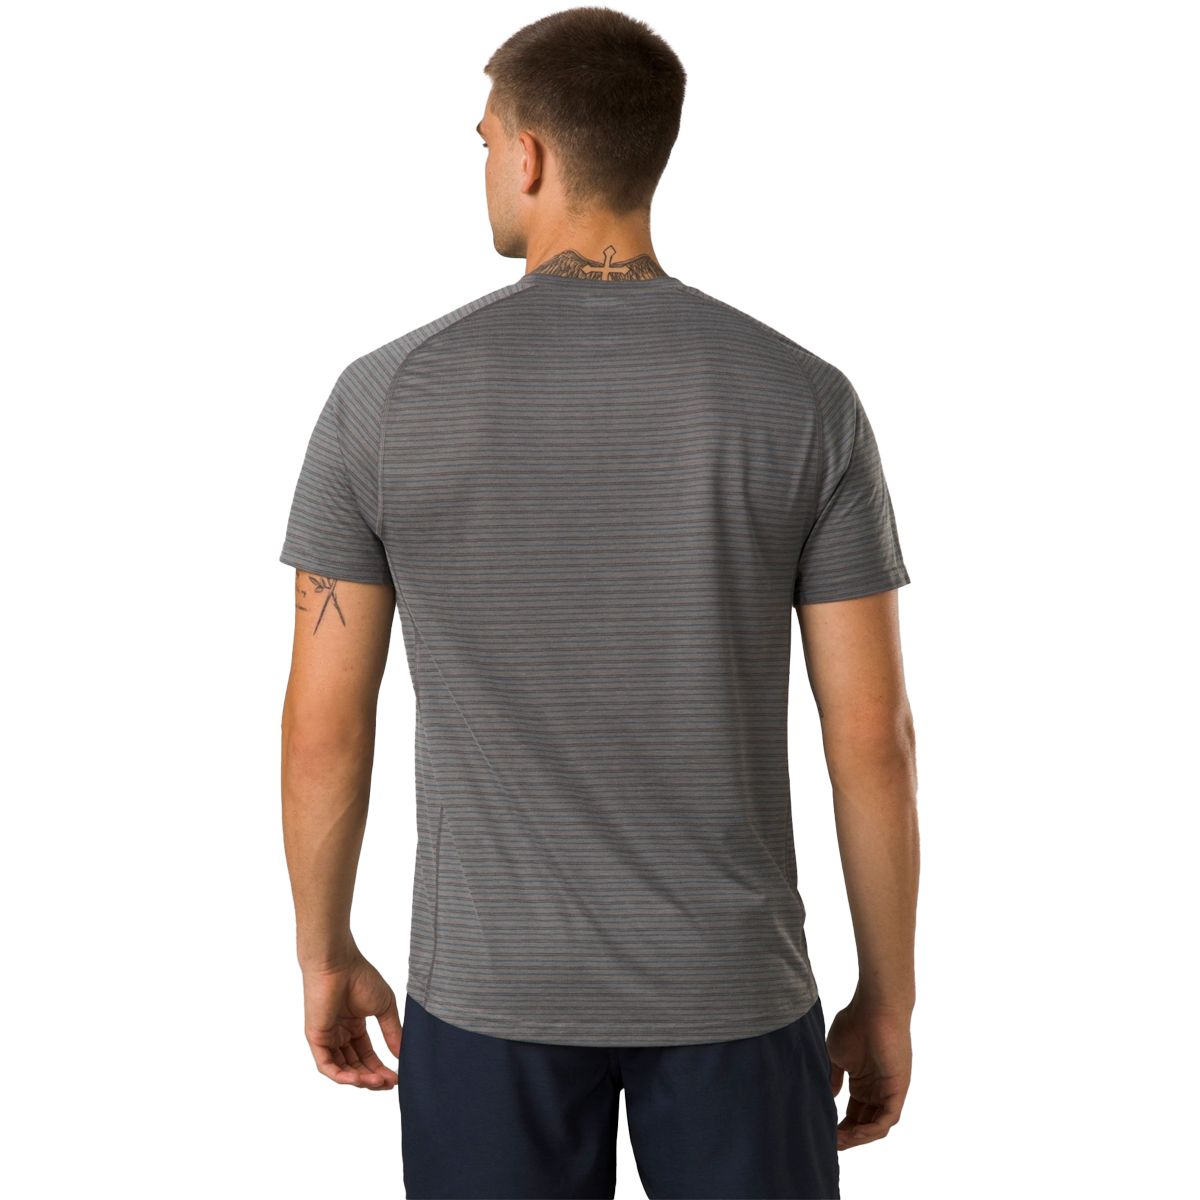 Mission Trails Short Sleeve Tee alternate view